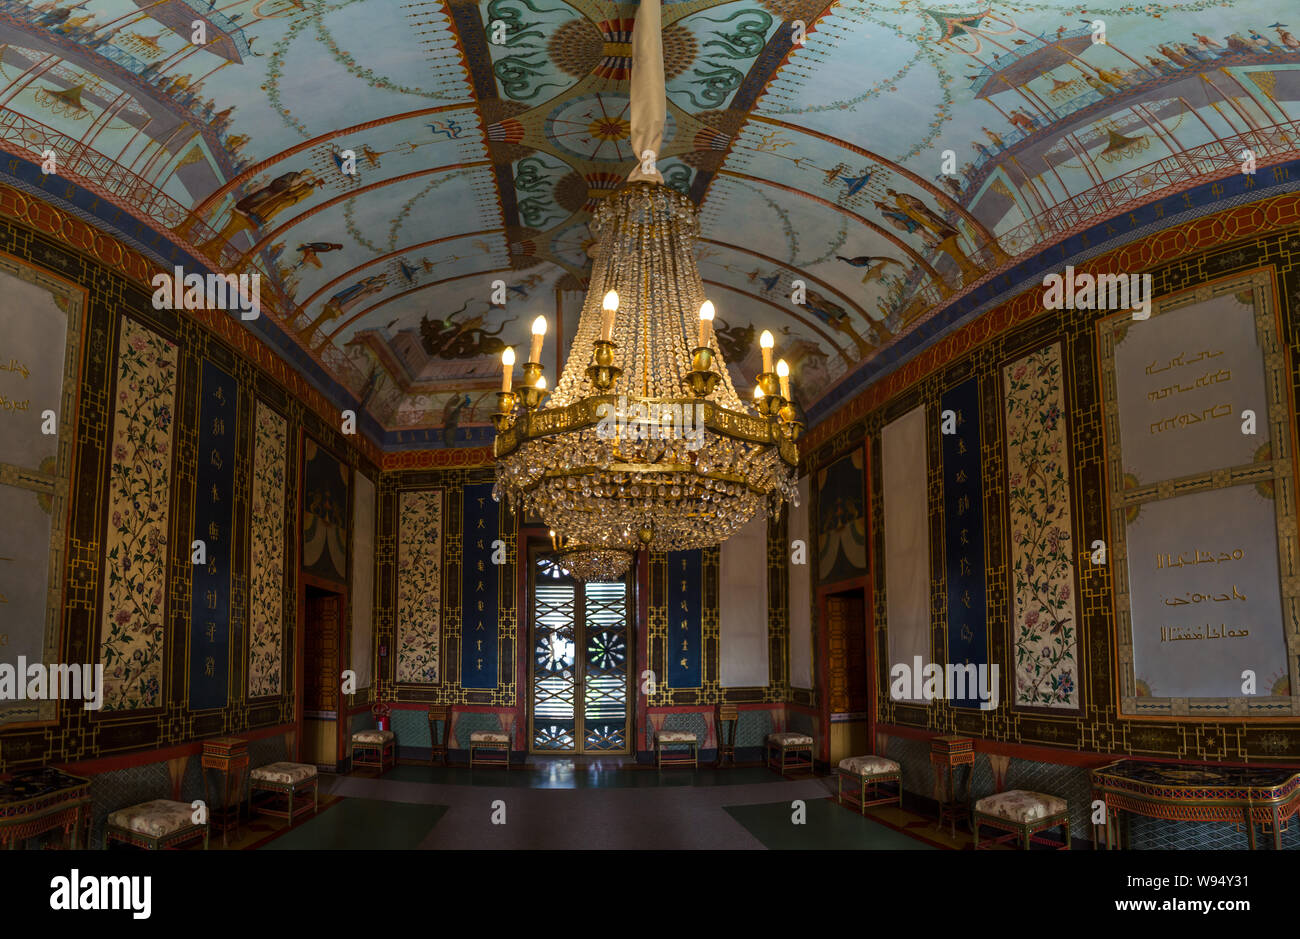 Interior of Chinese palace or Palazzina Cinese in Palermo Stock Photo